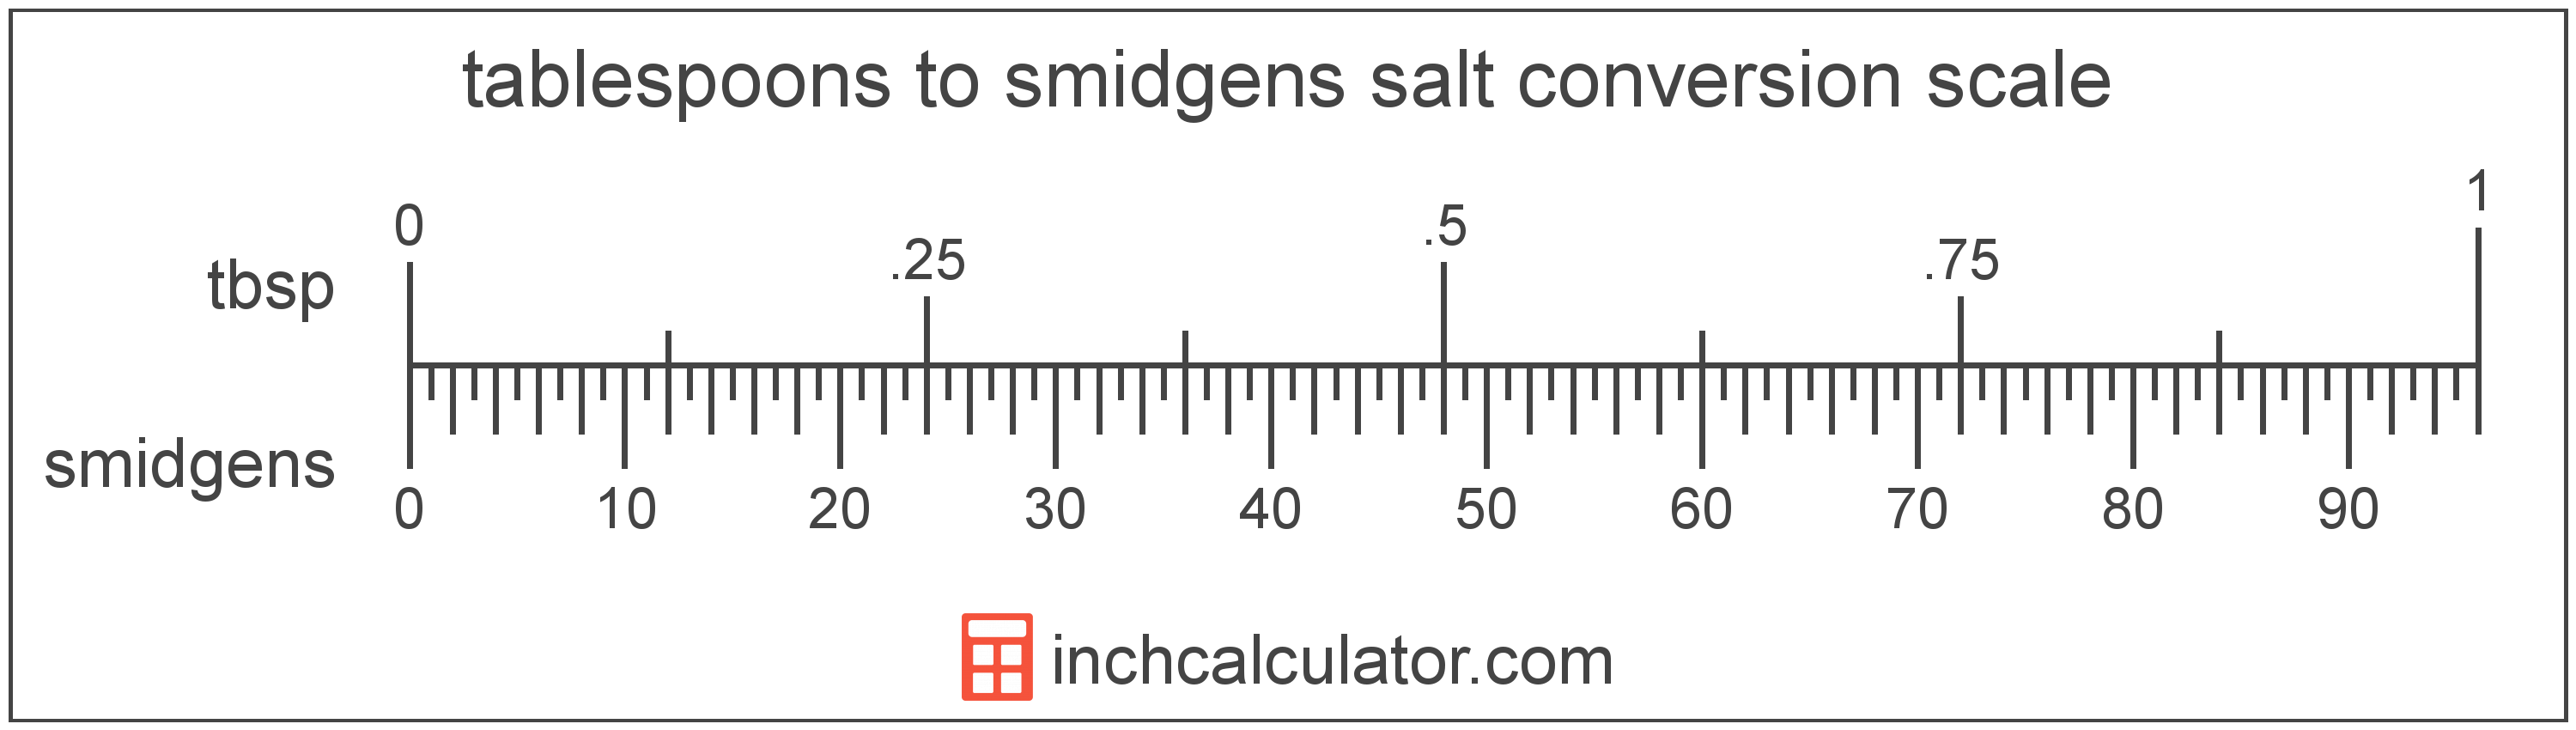 conversion scale showing tablespoons and equivalent smidgens salt volume values